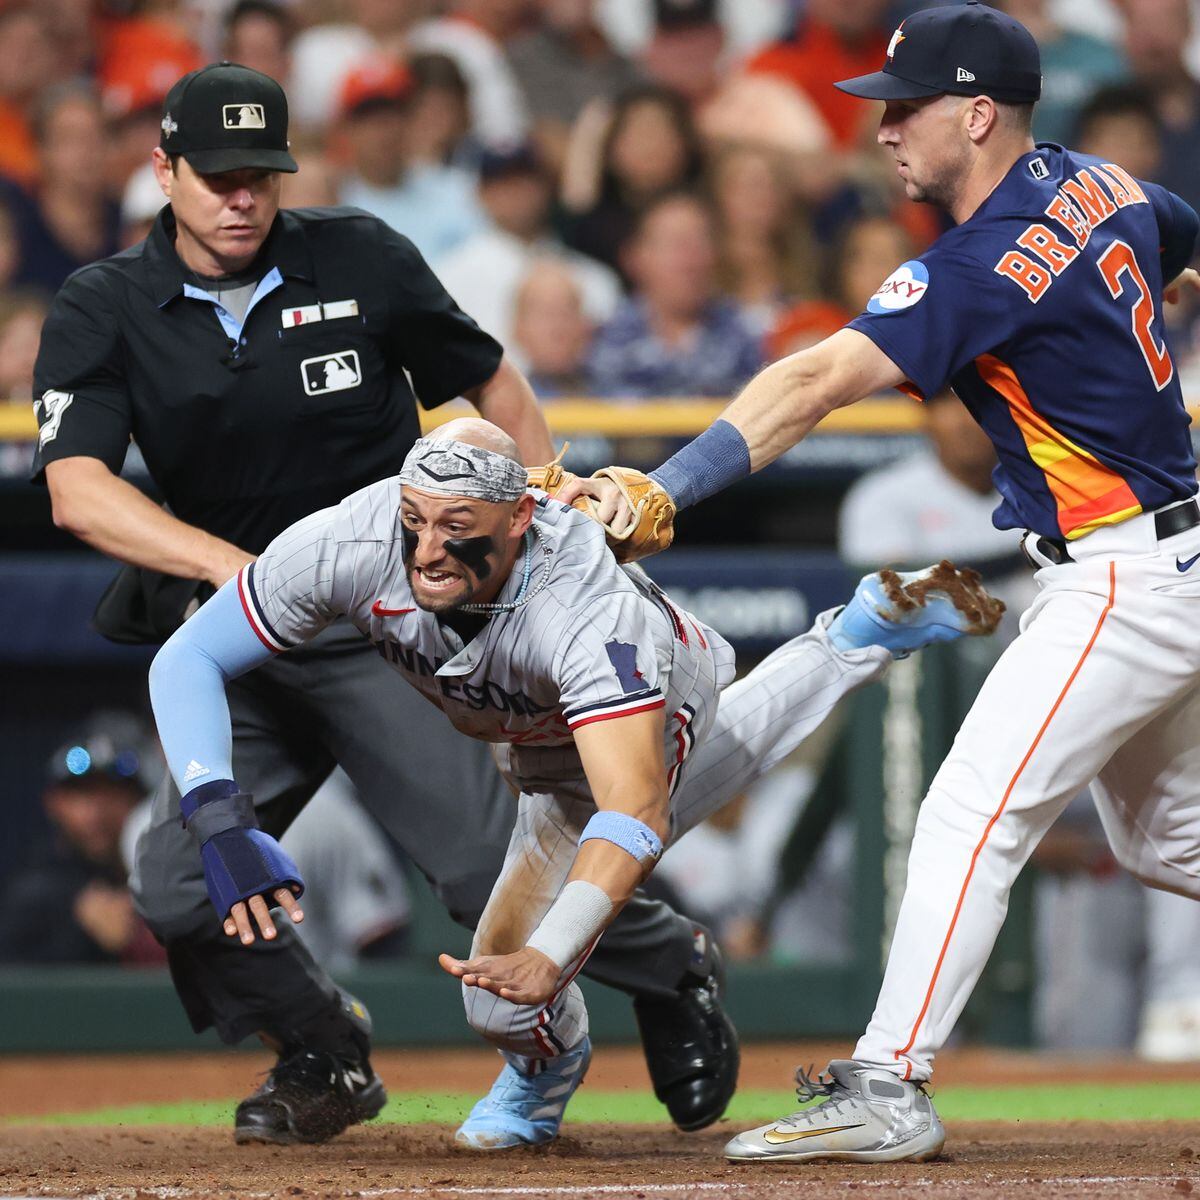 MLB - New on-field rules instituted beginning with the